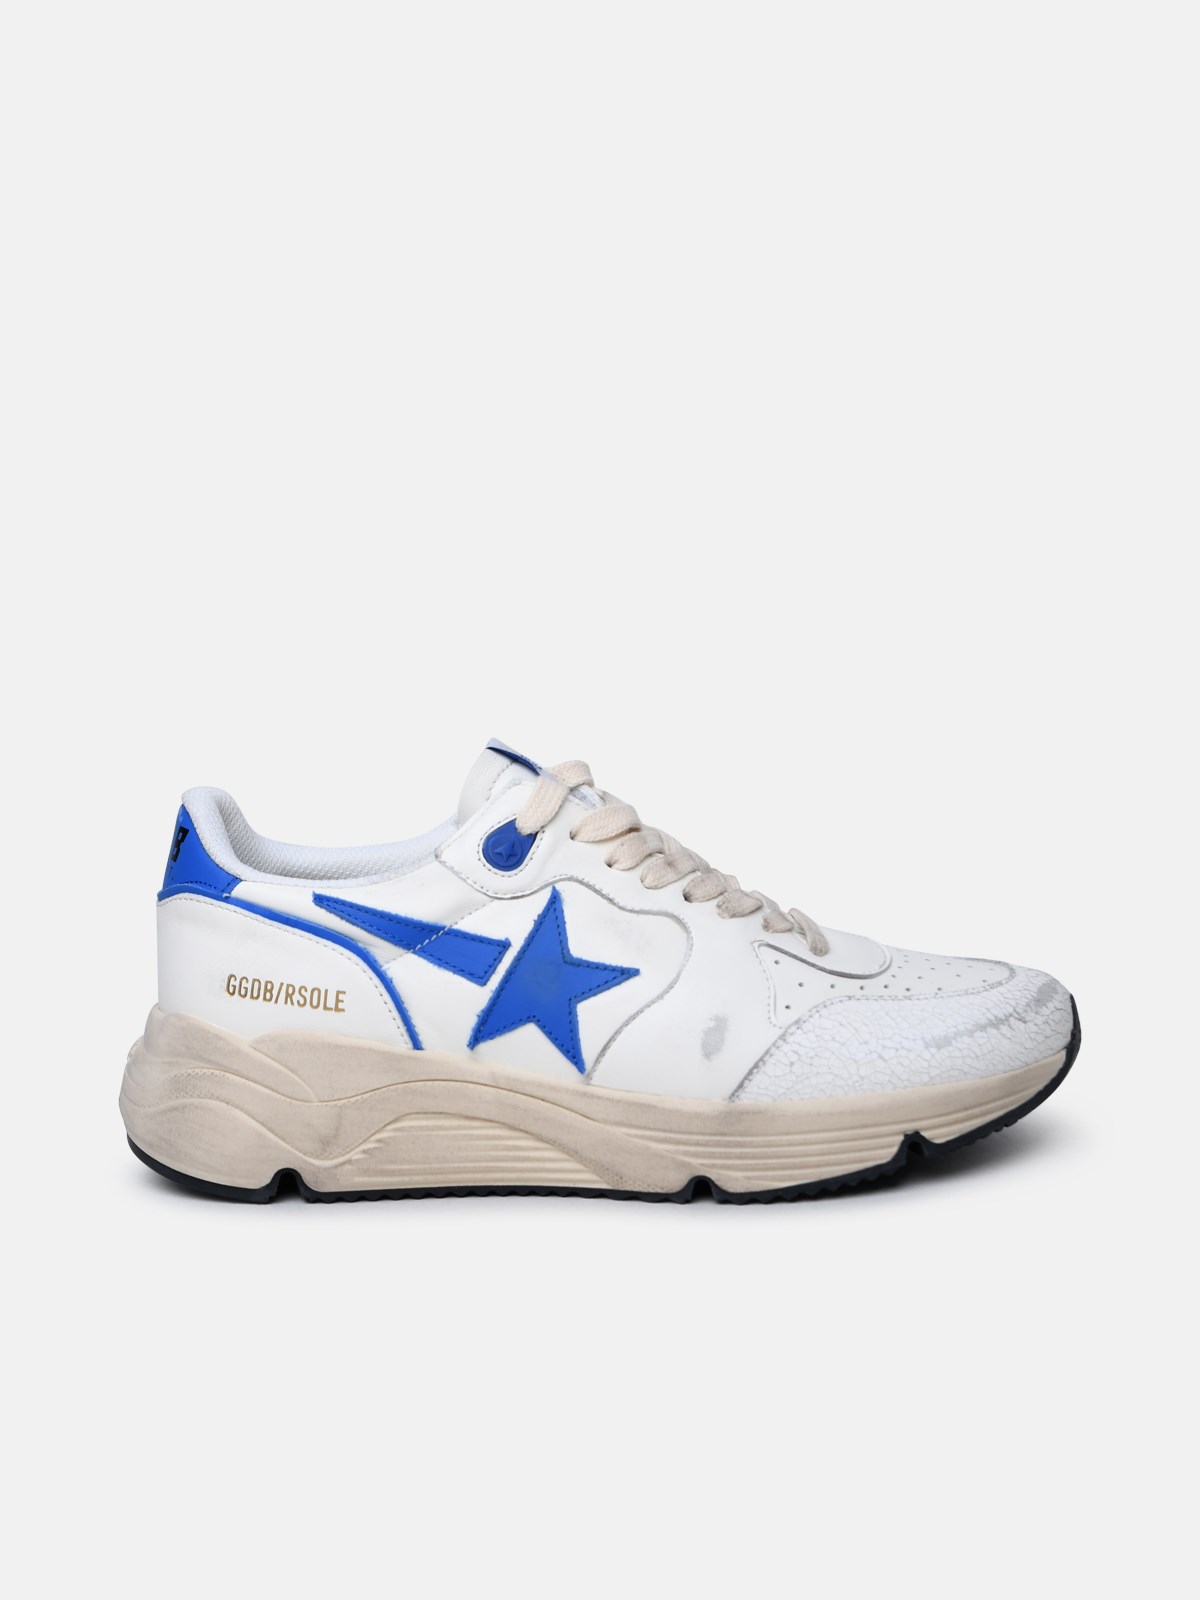 Golden Goose 'running Sole' White Leather Sneakers